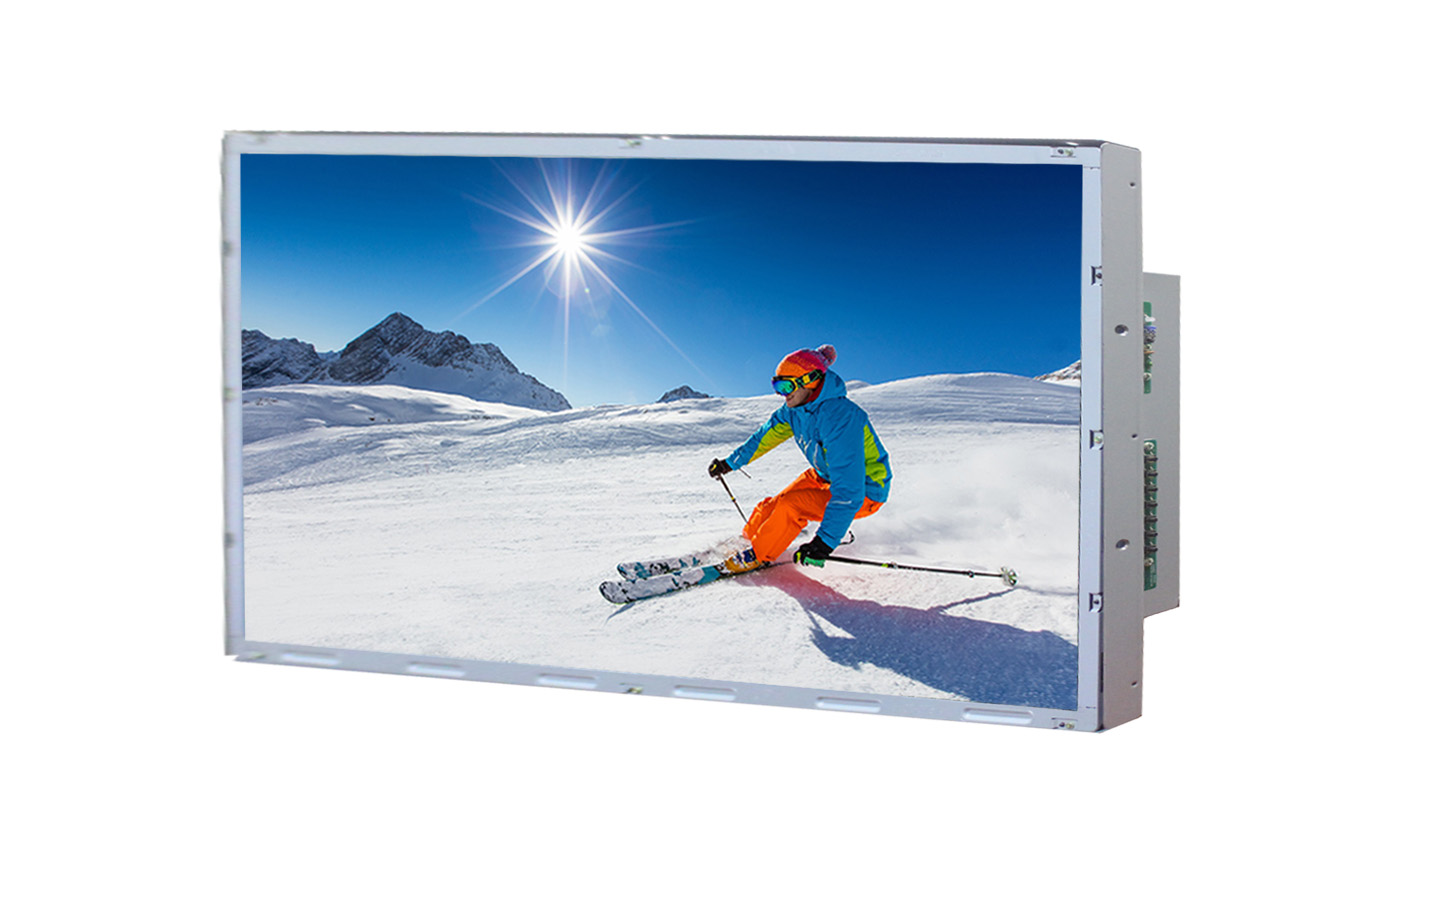 ultra high bright display with a skier